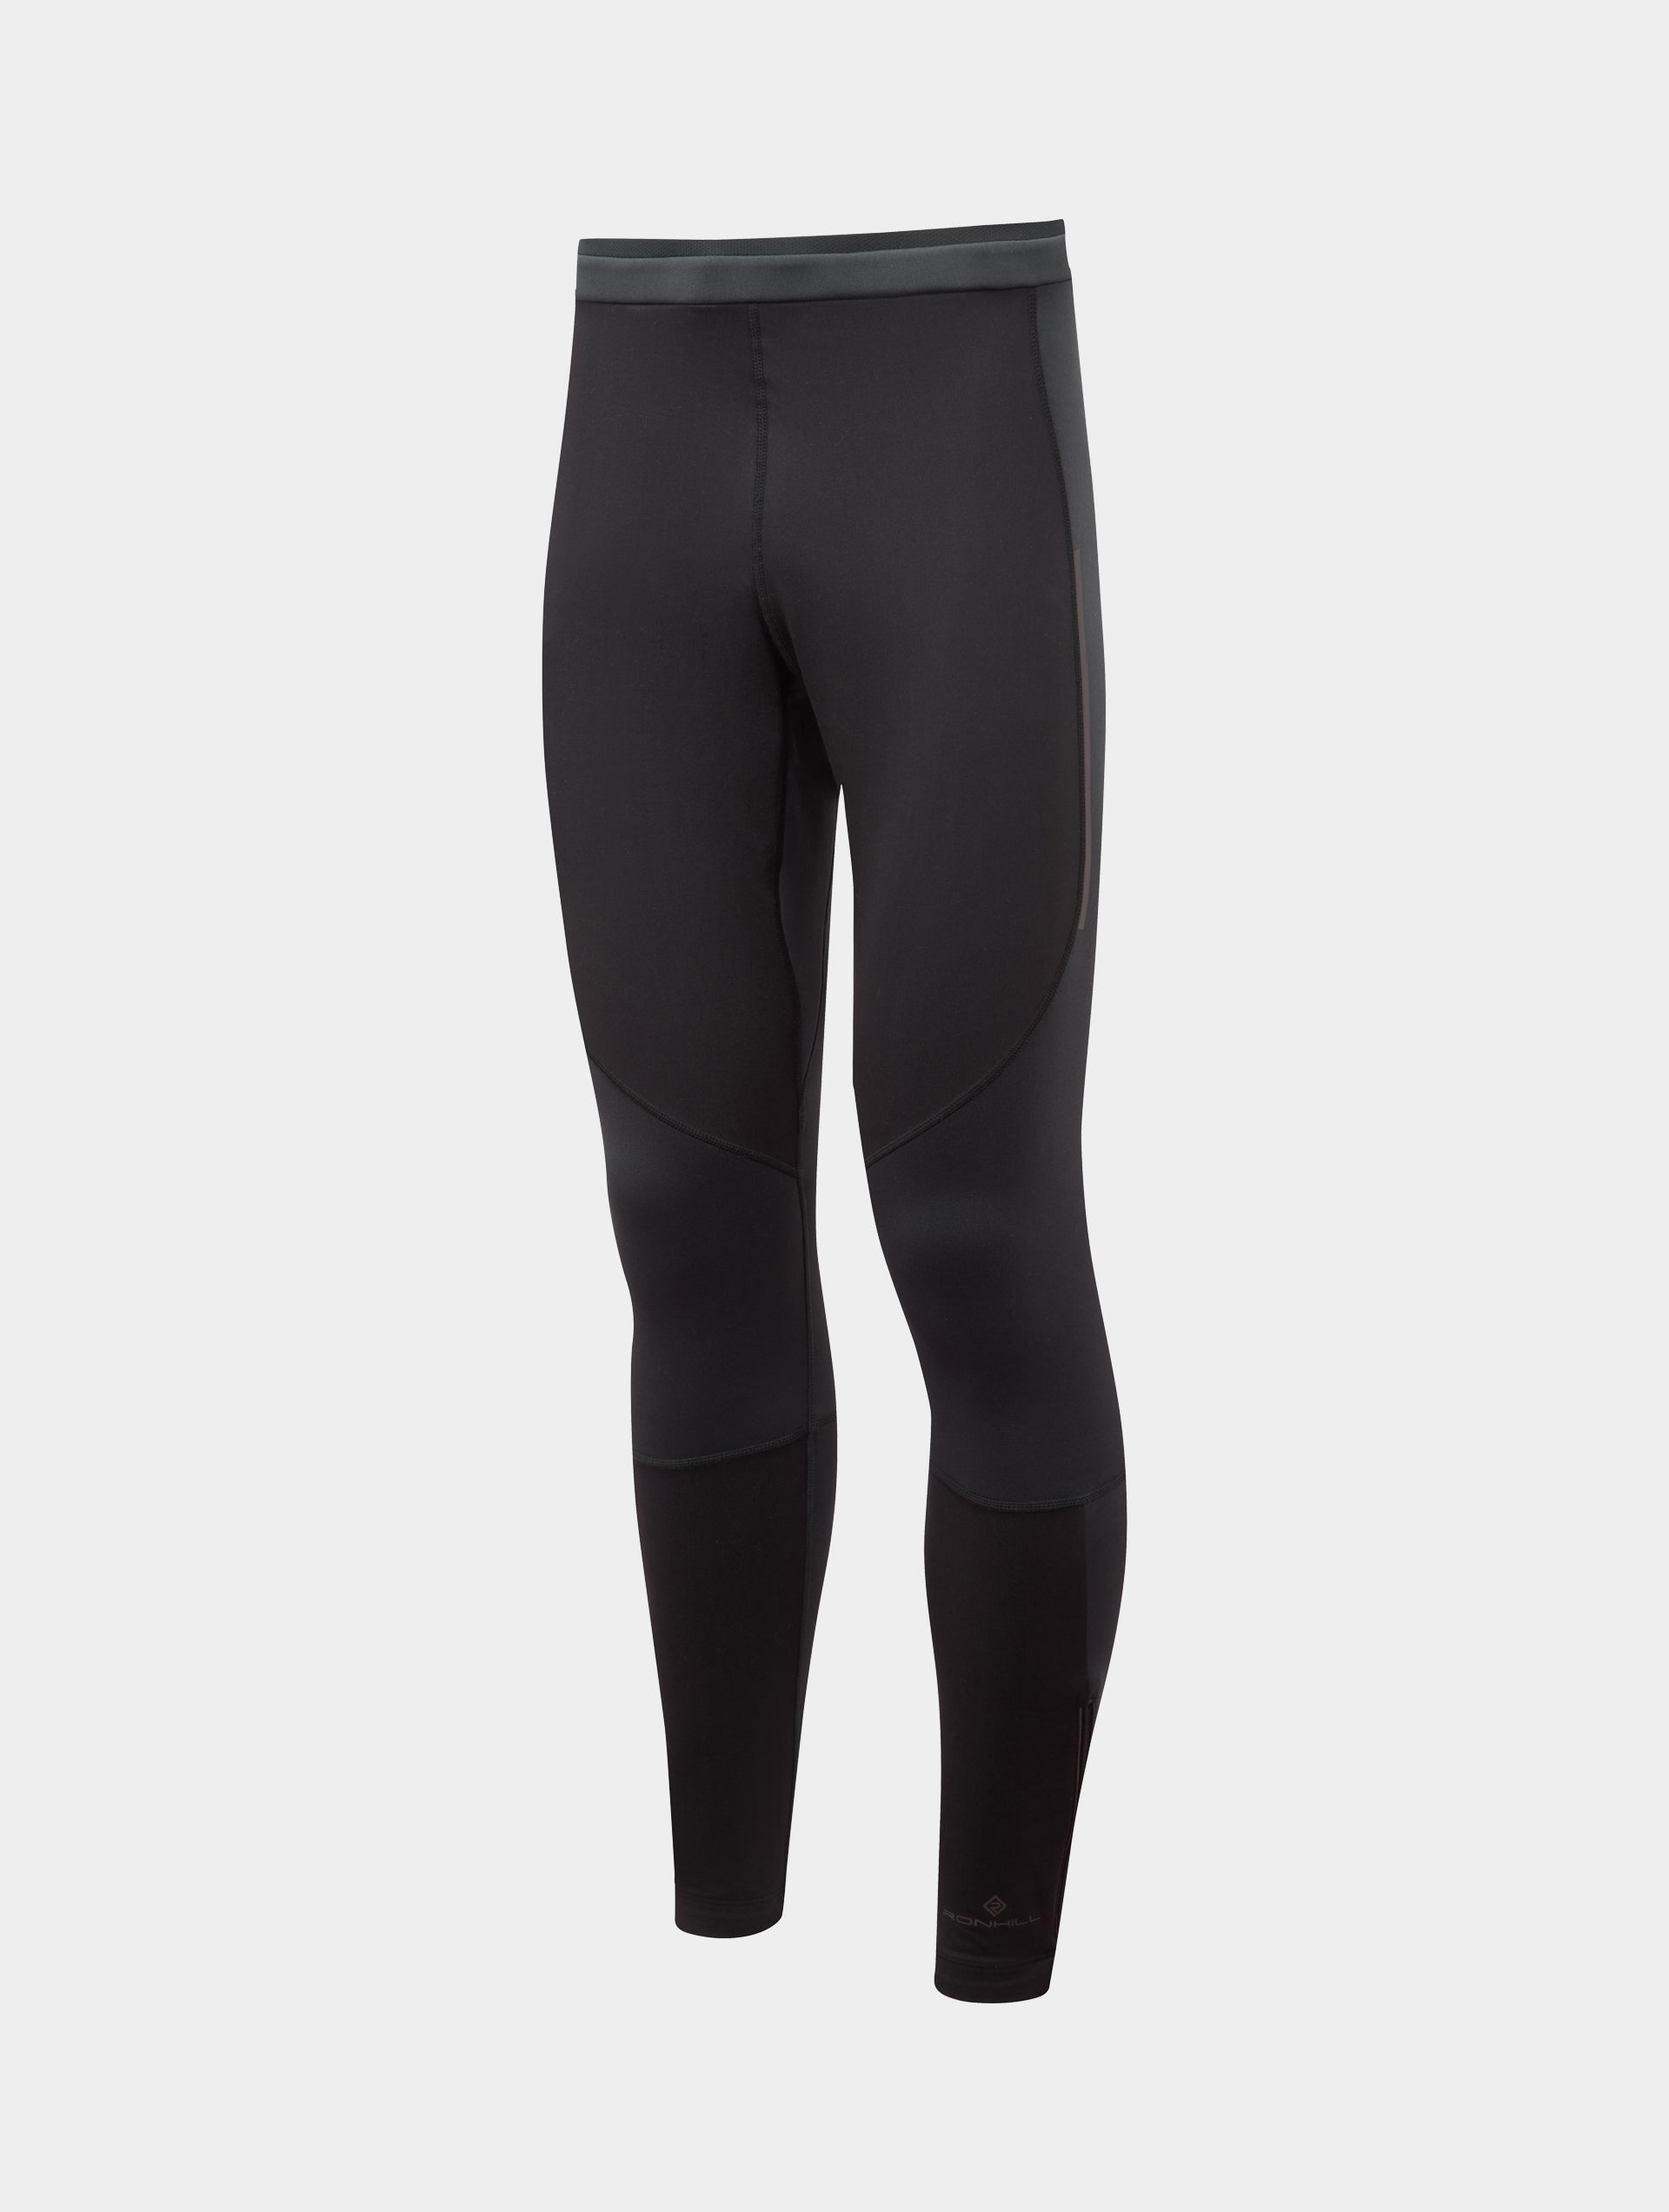 Ronhill Tech Revive Stretchy & Breathable Running Tights Black/Hot